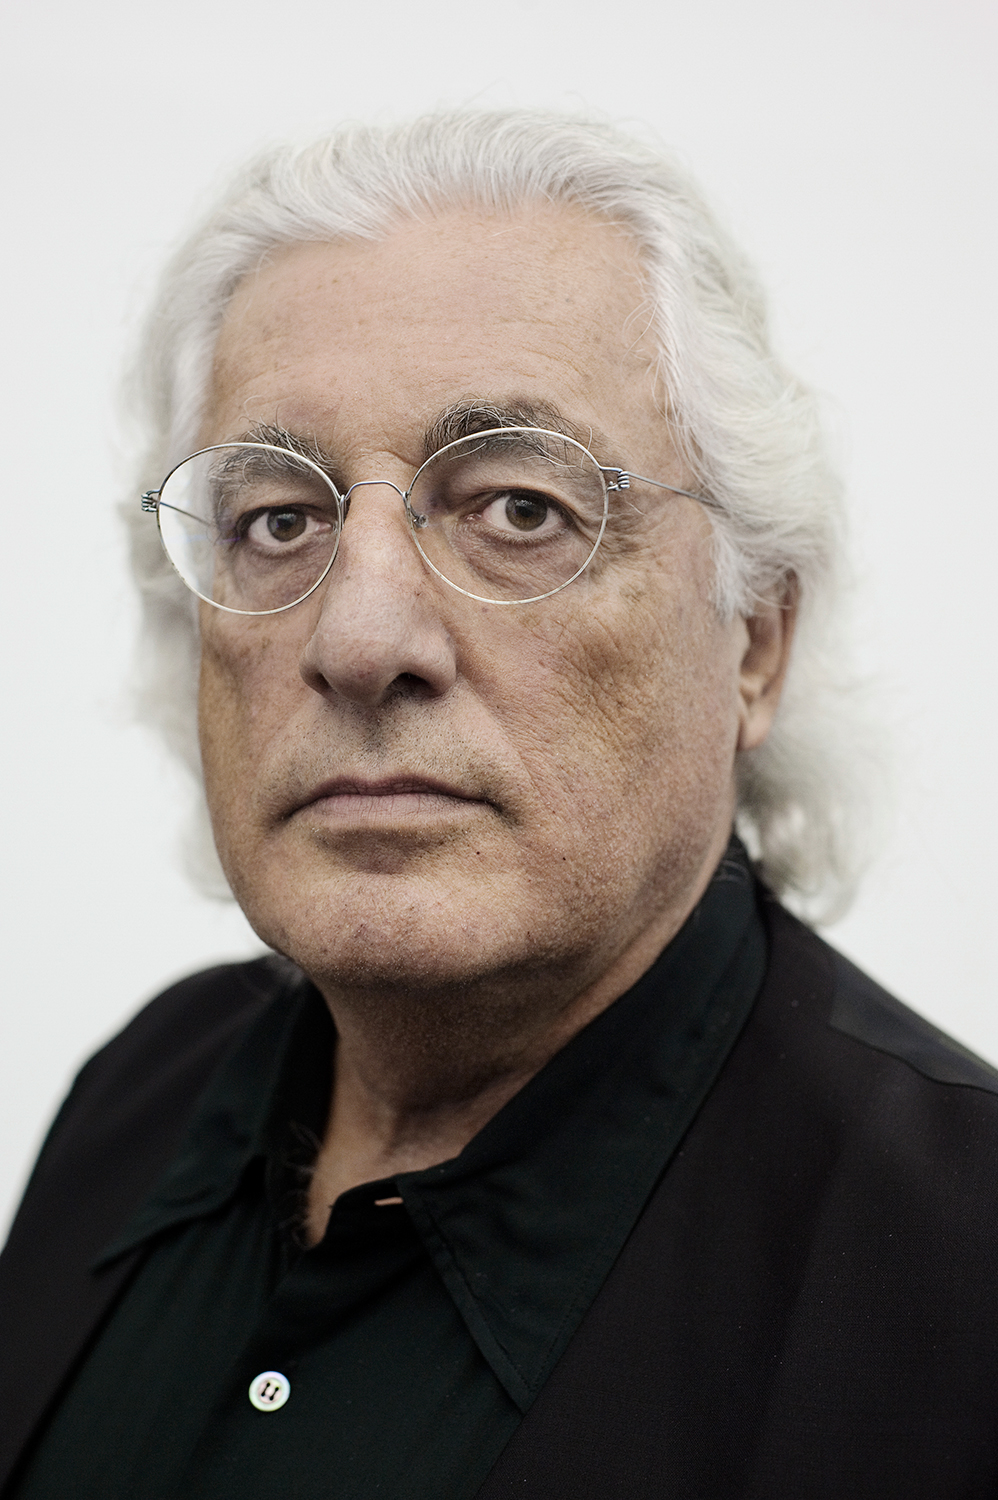 Germano Celant (b. Genoa, 1940) is an Italian art historian, critic and curator, who coined the term 